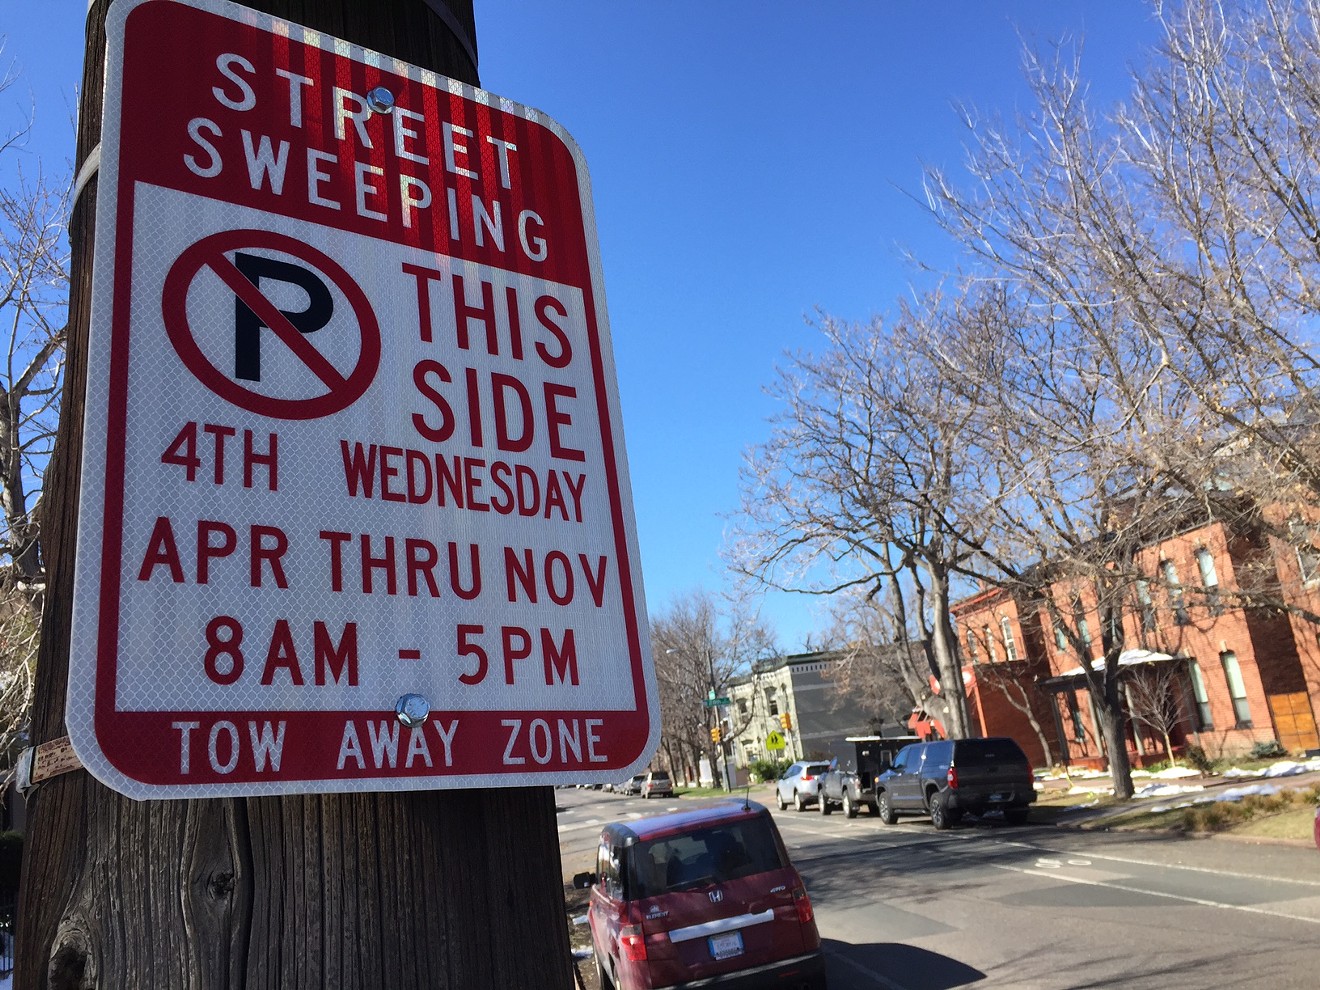 The only way to contest a street sweeping ticket in Denver is by filing a dispute online or calling the city Monday to Friday between 8 a.m. and 4:30 p.m.